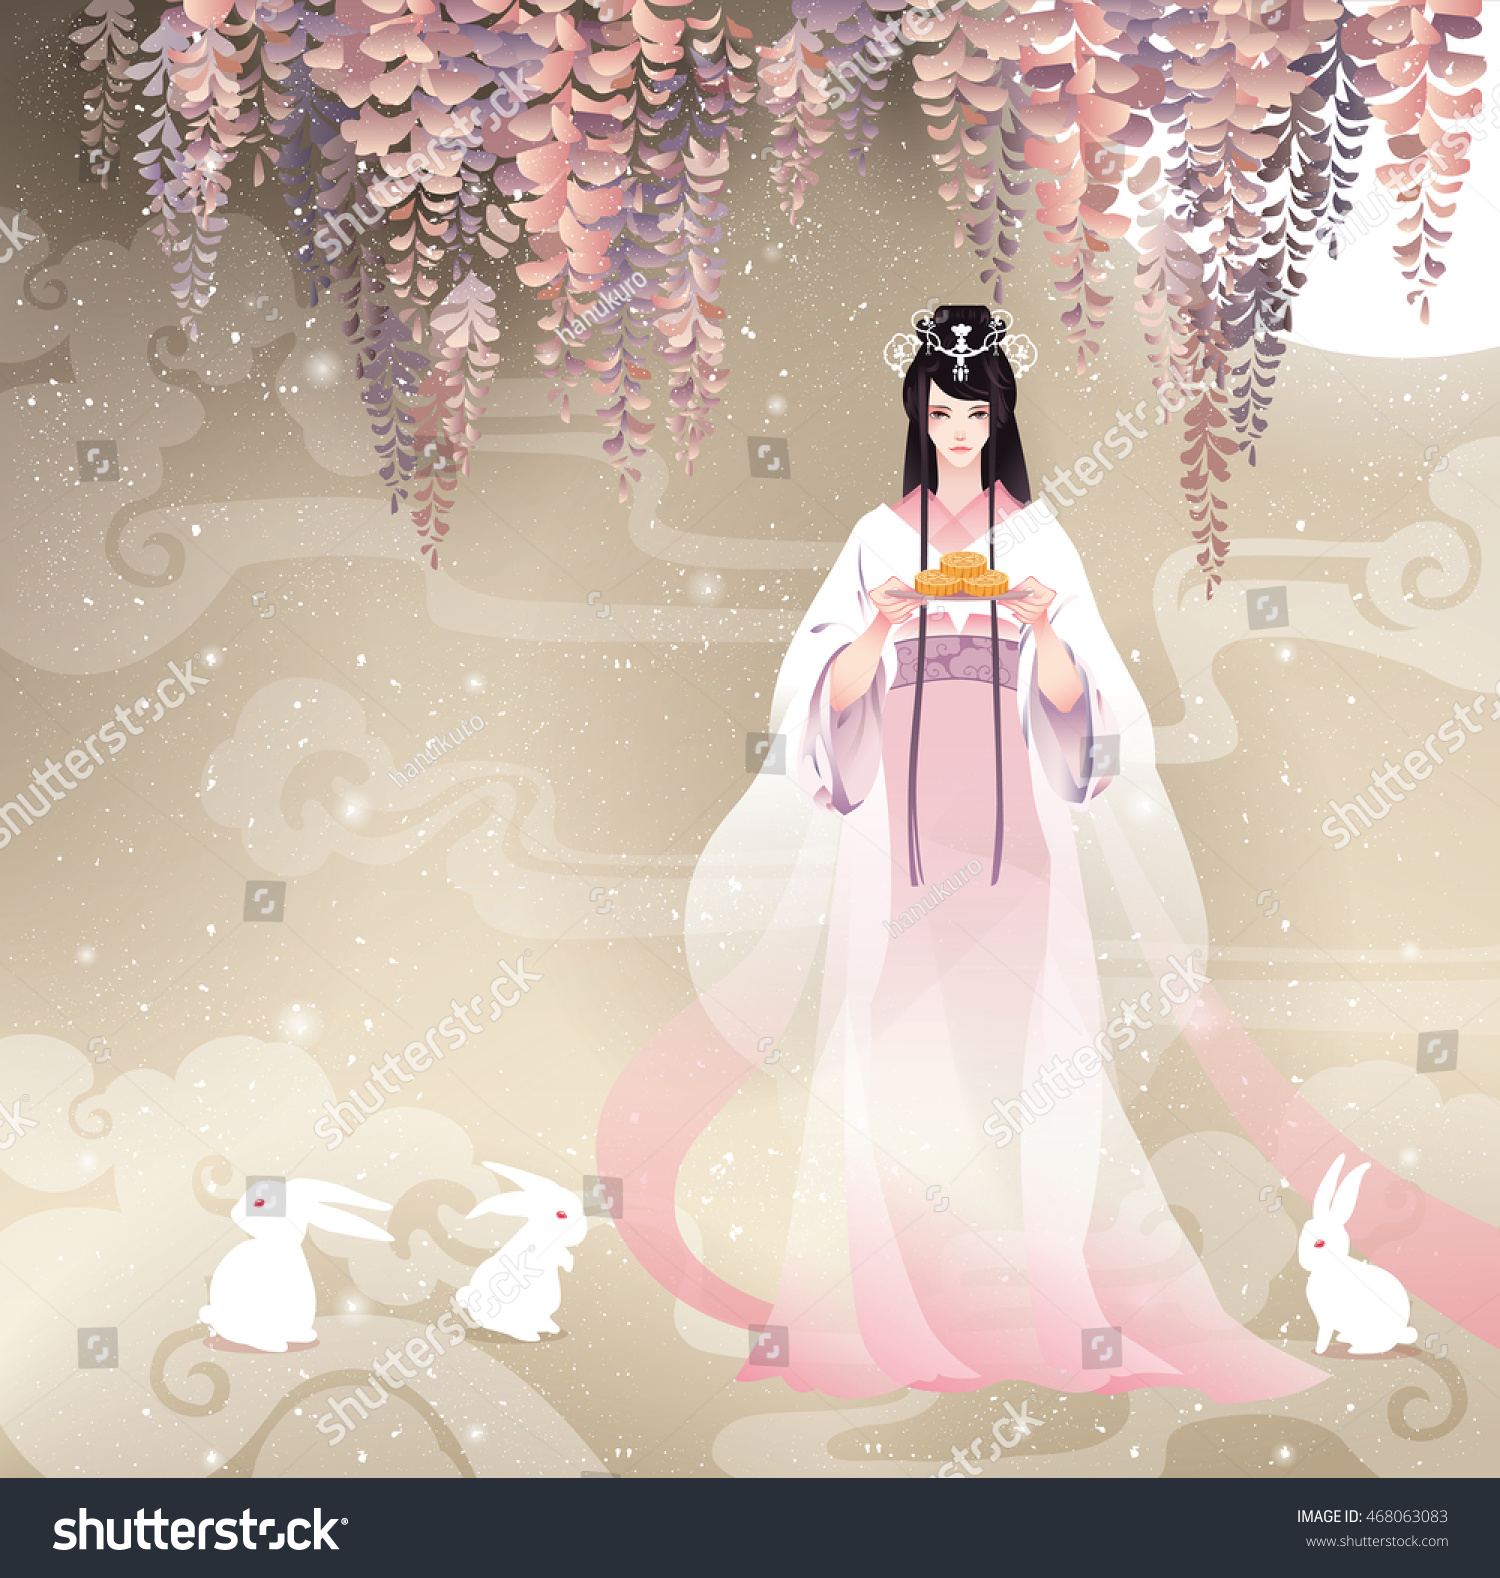 SVG of Chang'e, the Chinese Goddess of Moon with moon cake. Vector illustration cartoon mid autumn festival. Golden brown background, white  rabbits, wisteria flower waterfall. Watercolor style. svg